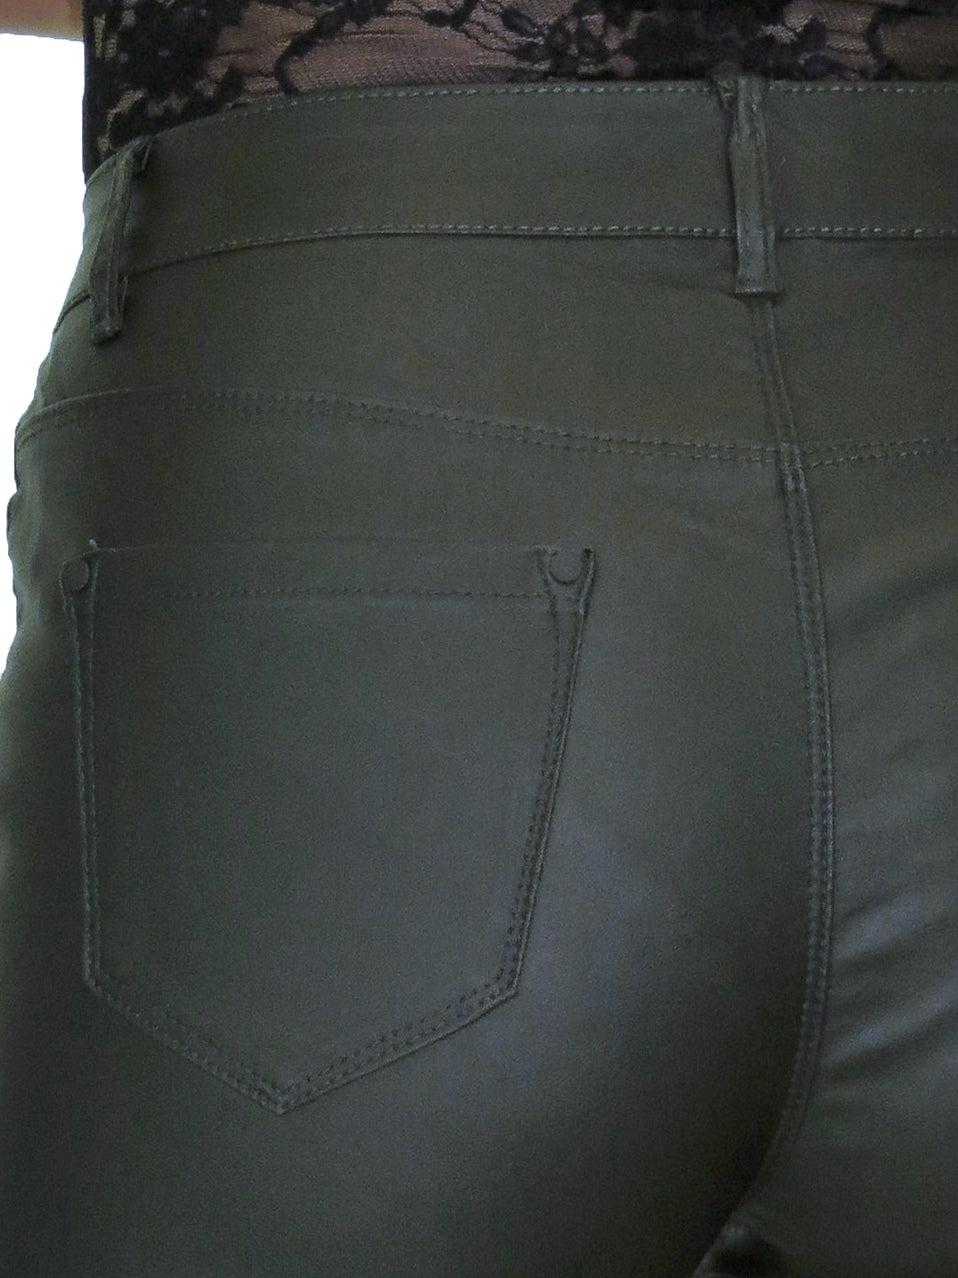 Womens High Waist Stretch Leather Look Jeans Olive Green